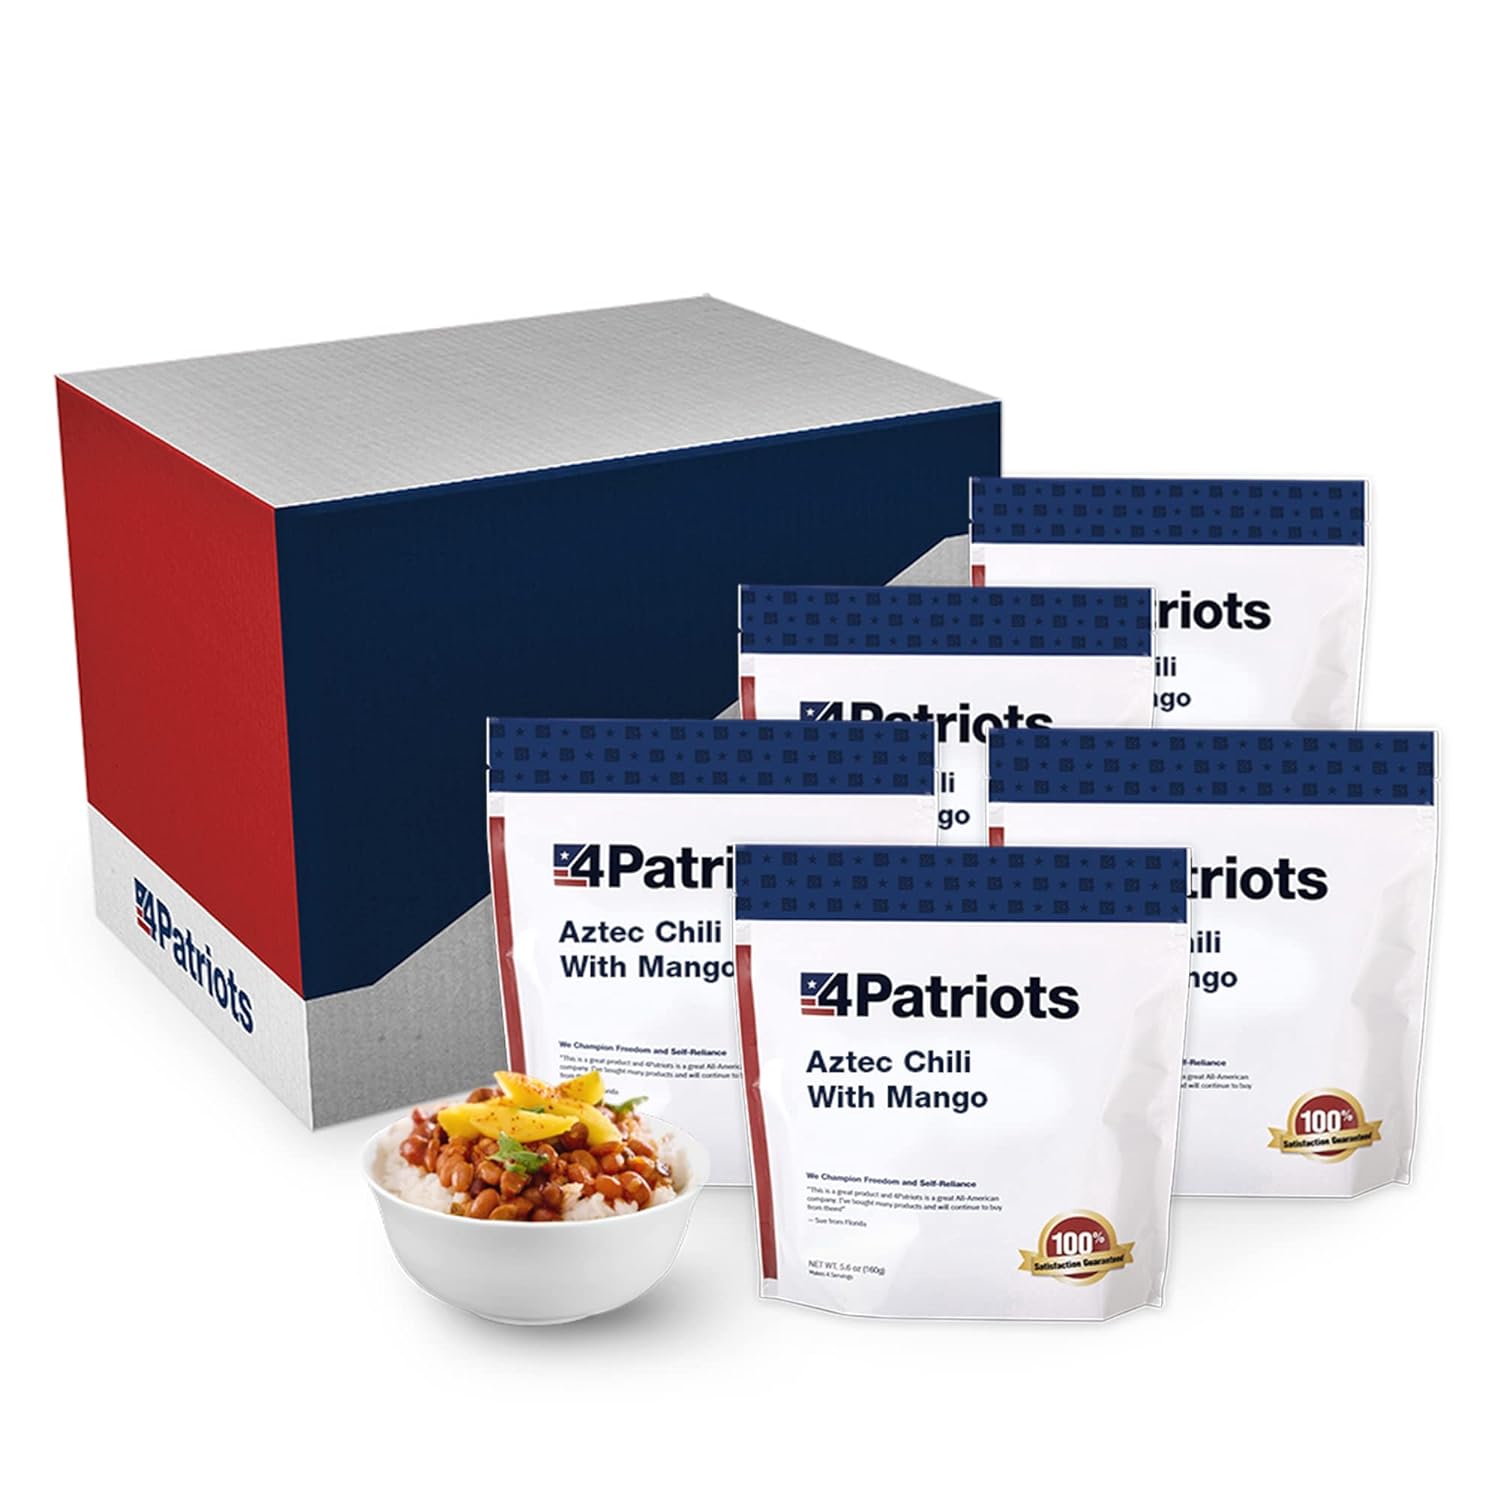 4Patriots Aztec Chili with Mango Survival Food Kit, Emergency Food Supply, Freeze-Dried Chili, Hearty Beans, Designed To Last 25 Years, Disaster-Resistant Packaging, 40 Mouth-Watering Servings